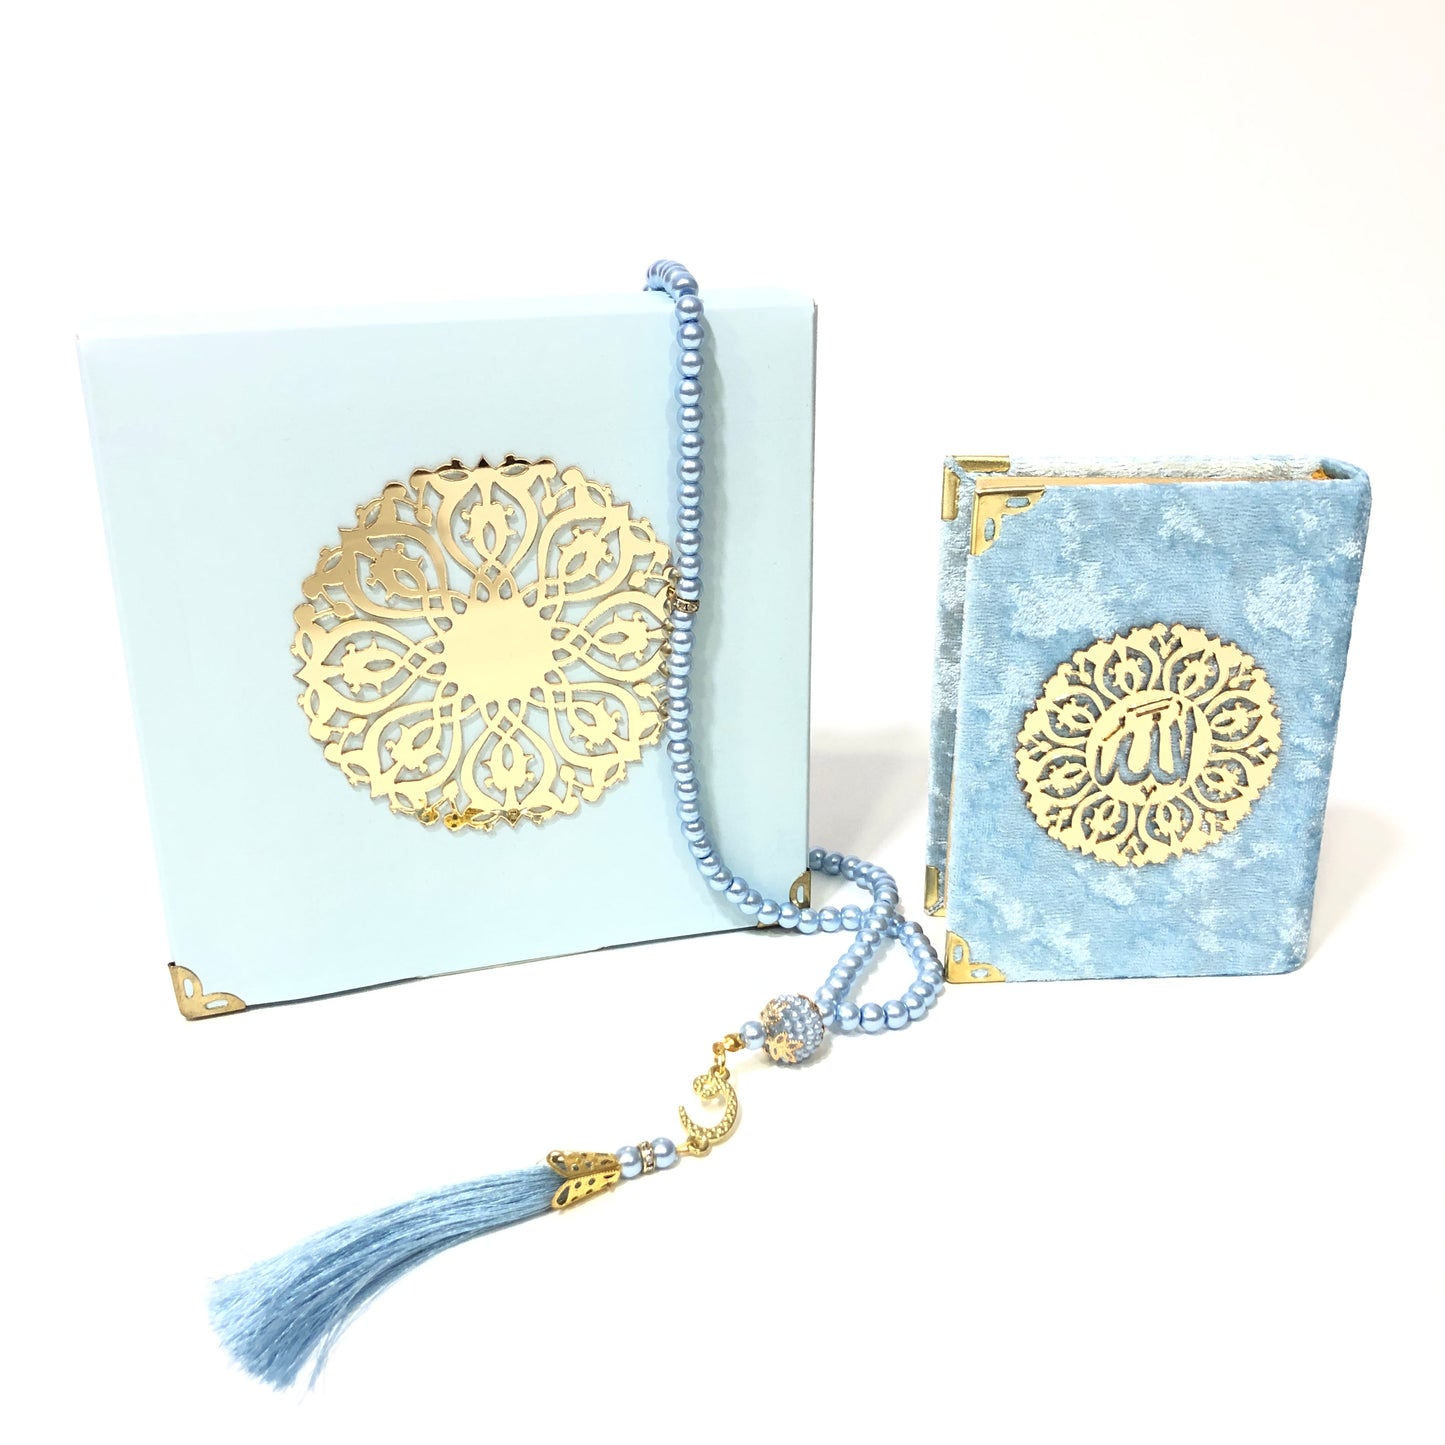 [REDUCED!]Quran and Tasbih Set - Choose your Colour!